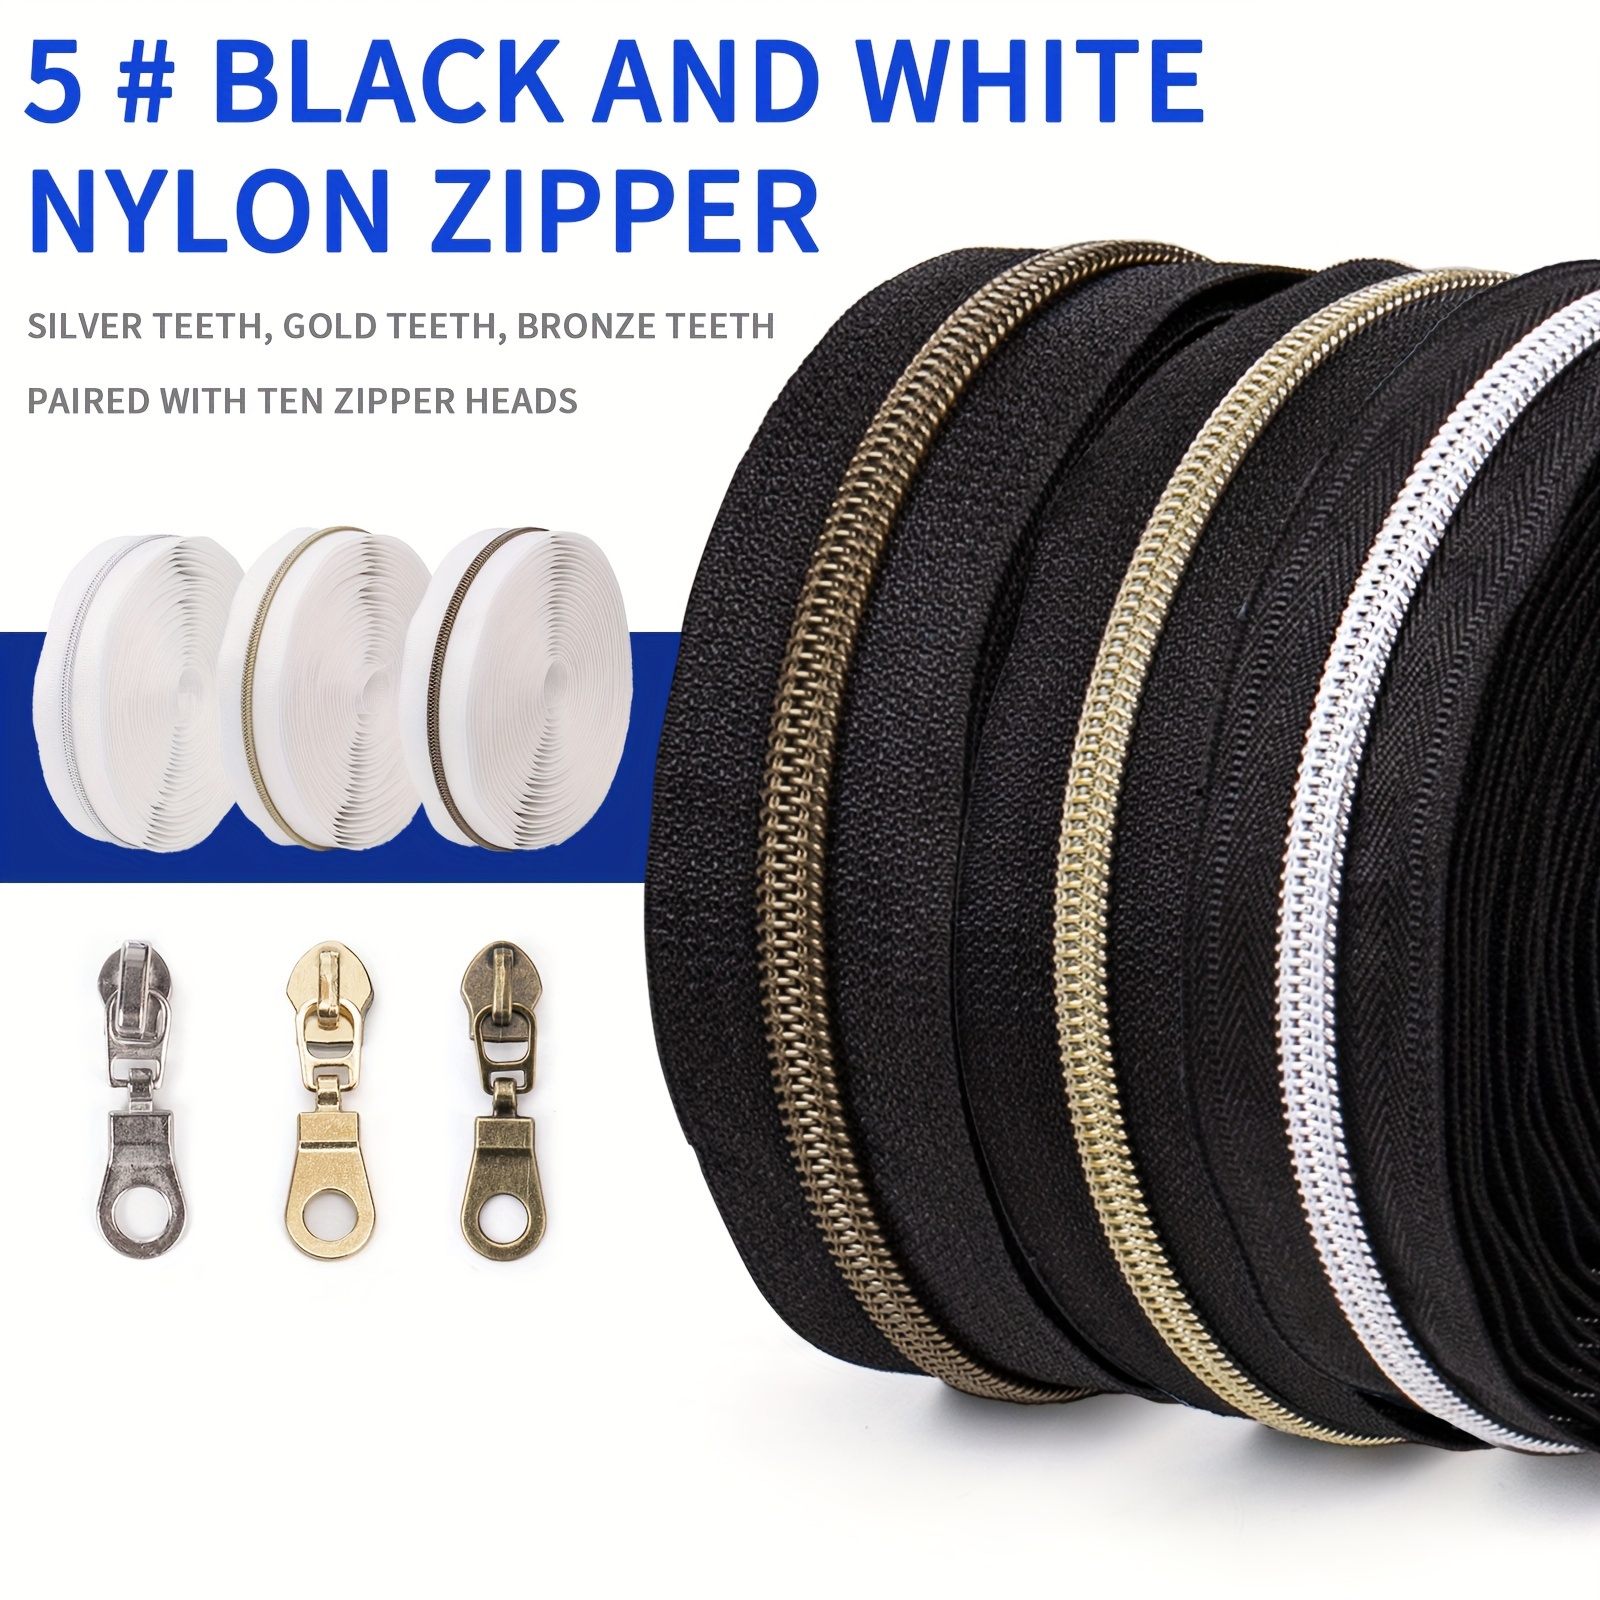 

1pc Black And White #5 Nylon Zipper Set With 10 Assorted Zipper Heads, Color Contrast Light Gold, Antique Bronze, And Silver Teeth, Ideal For Clothing, Luggage, Home Textiles, Leather Diy Sewing